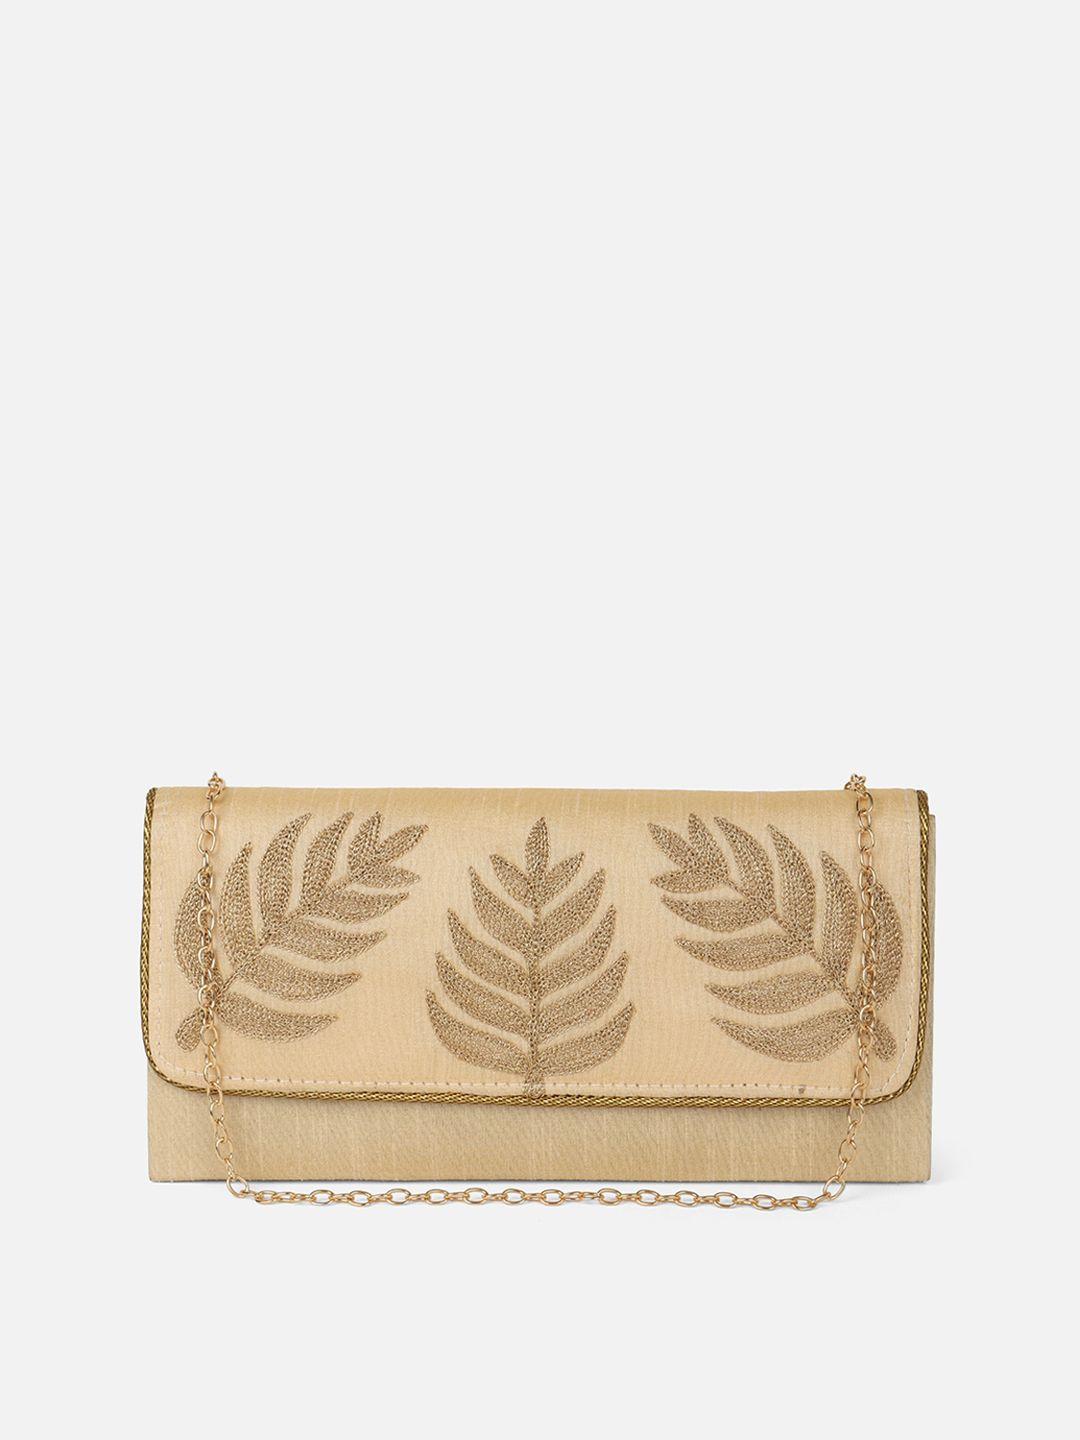 aditi wasan women embroidered clutches